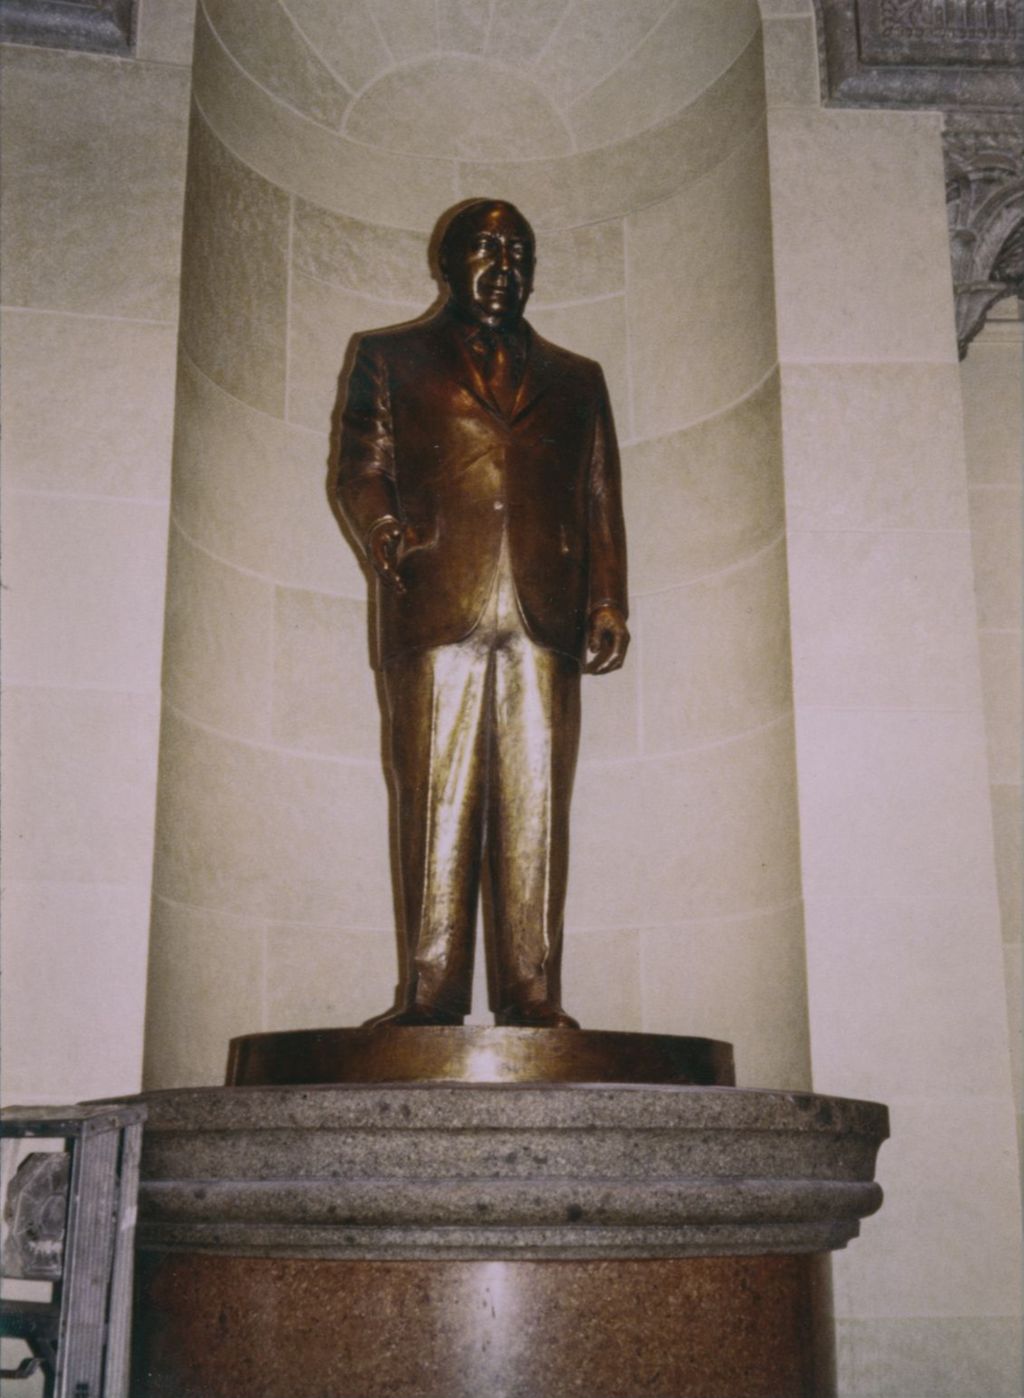 Miniature of The Richard J. Daley statue installed